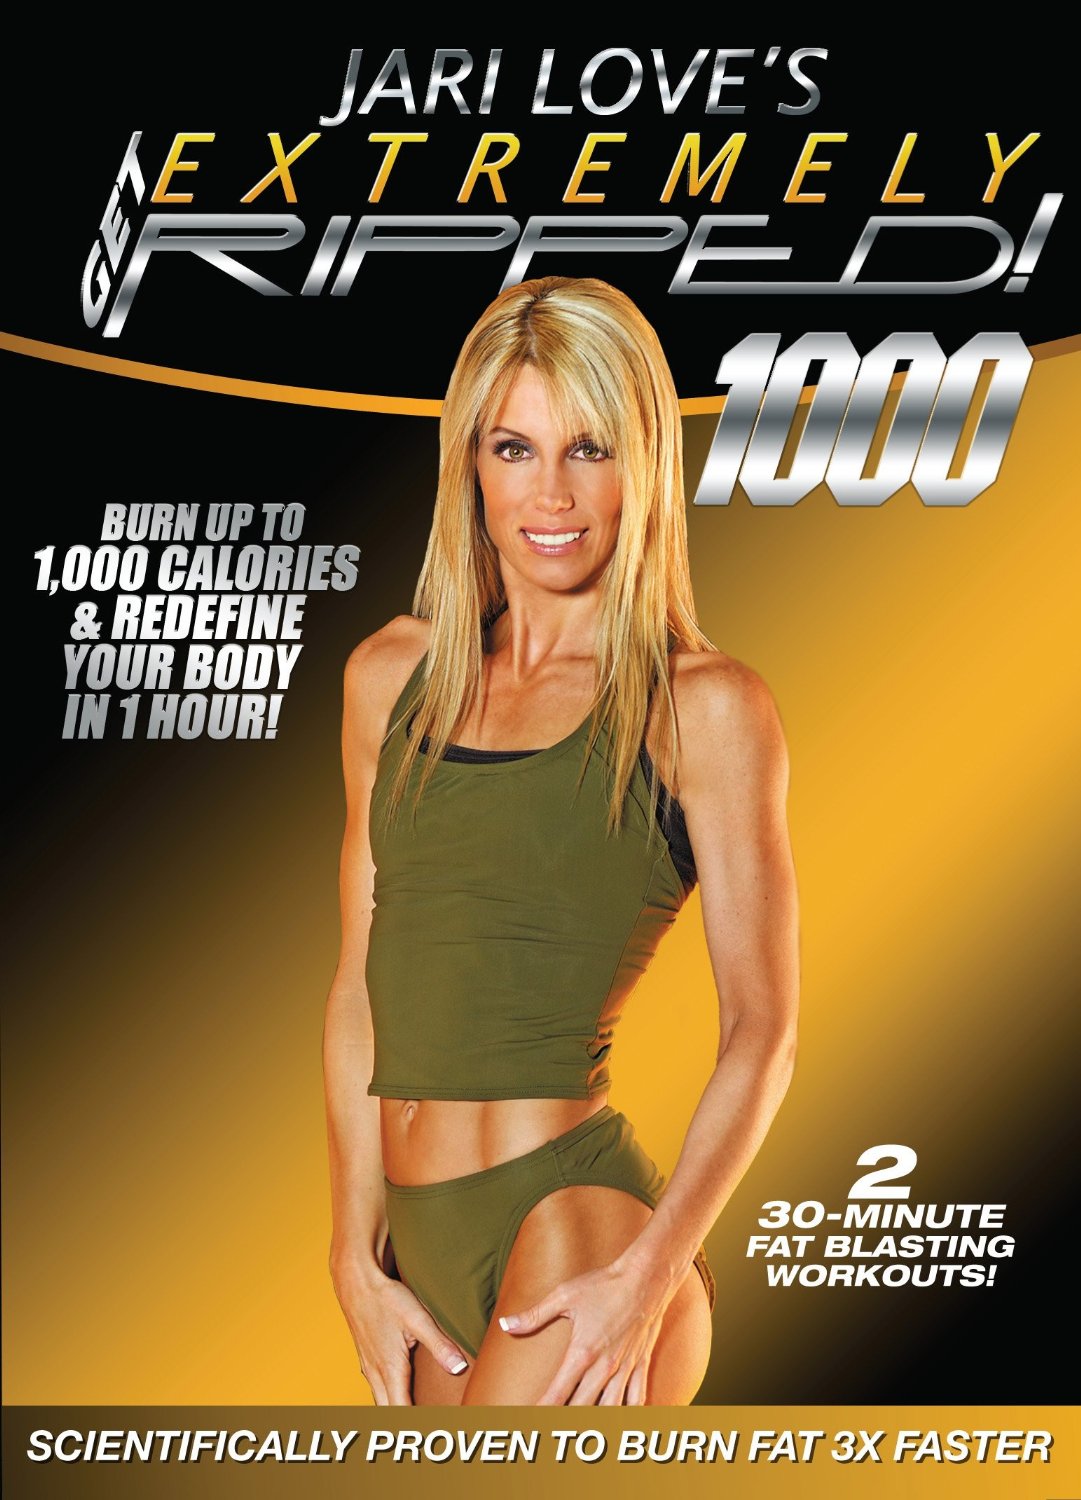 Get Extremely RIPPED!® 1000 (Download) - Get RIPPED!® by Jari Love